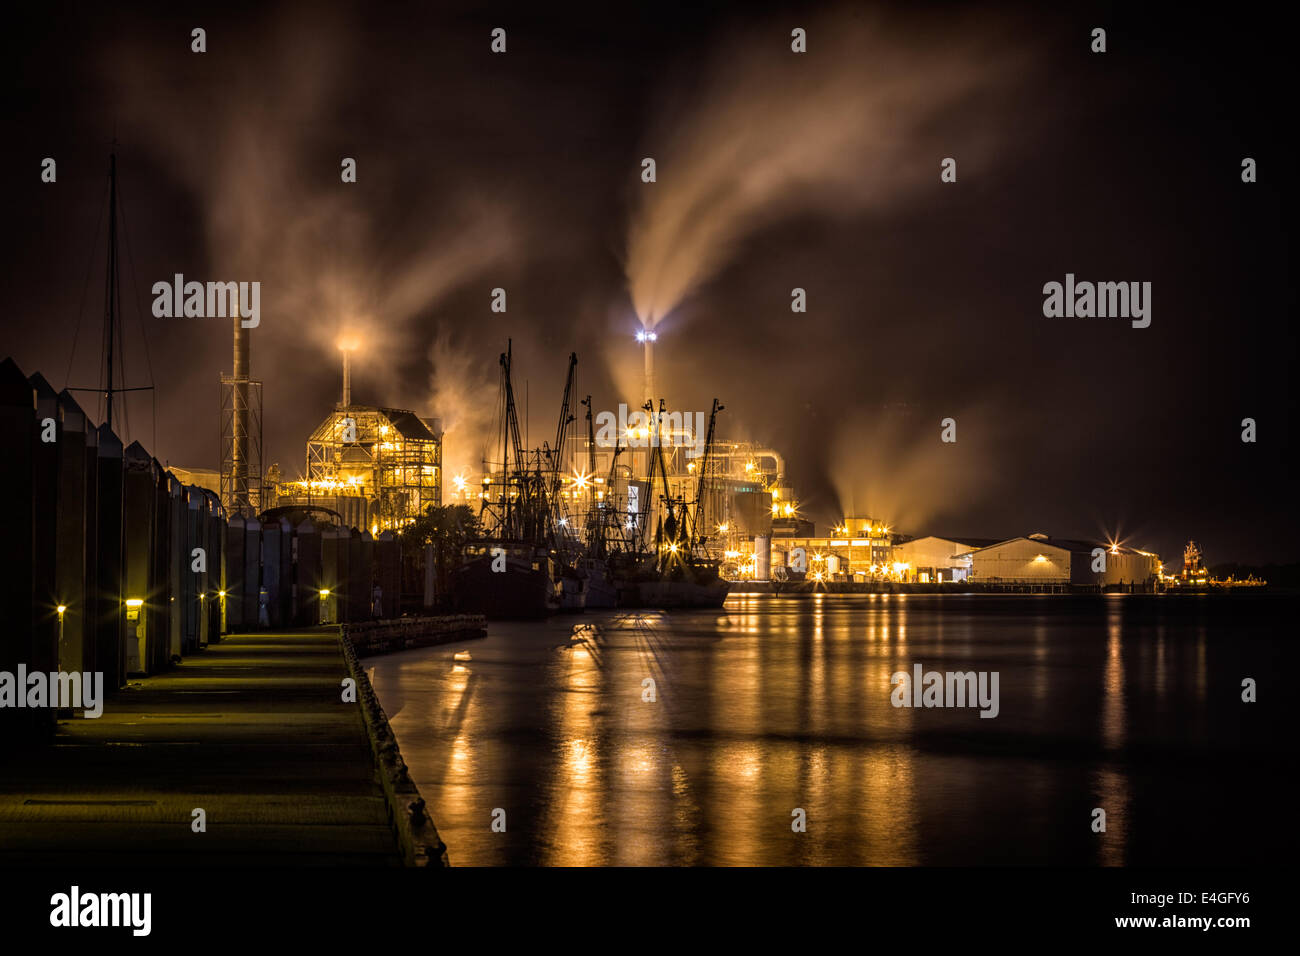 Dramatic night photograph of Fernandina Beach Shrimp Boatssilhouetted by the lights of Rayonier pulp mill on Amelia Island, Flor Stock Photo